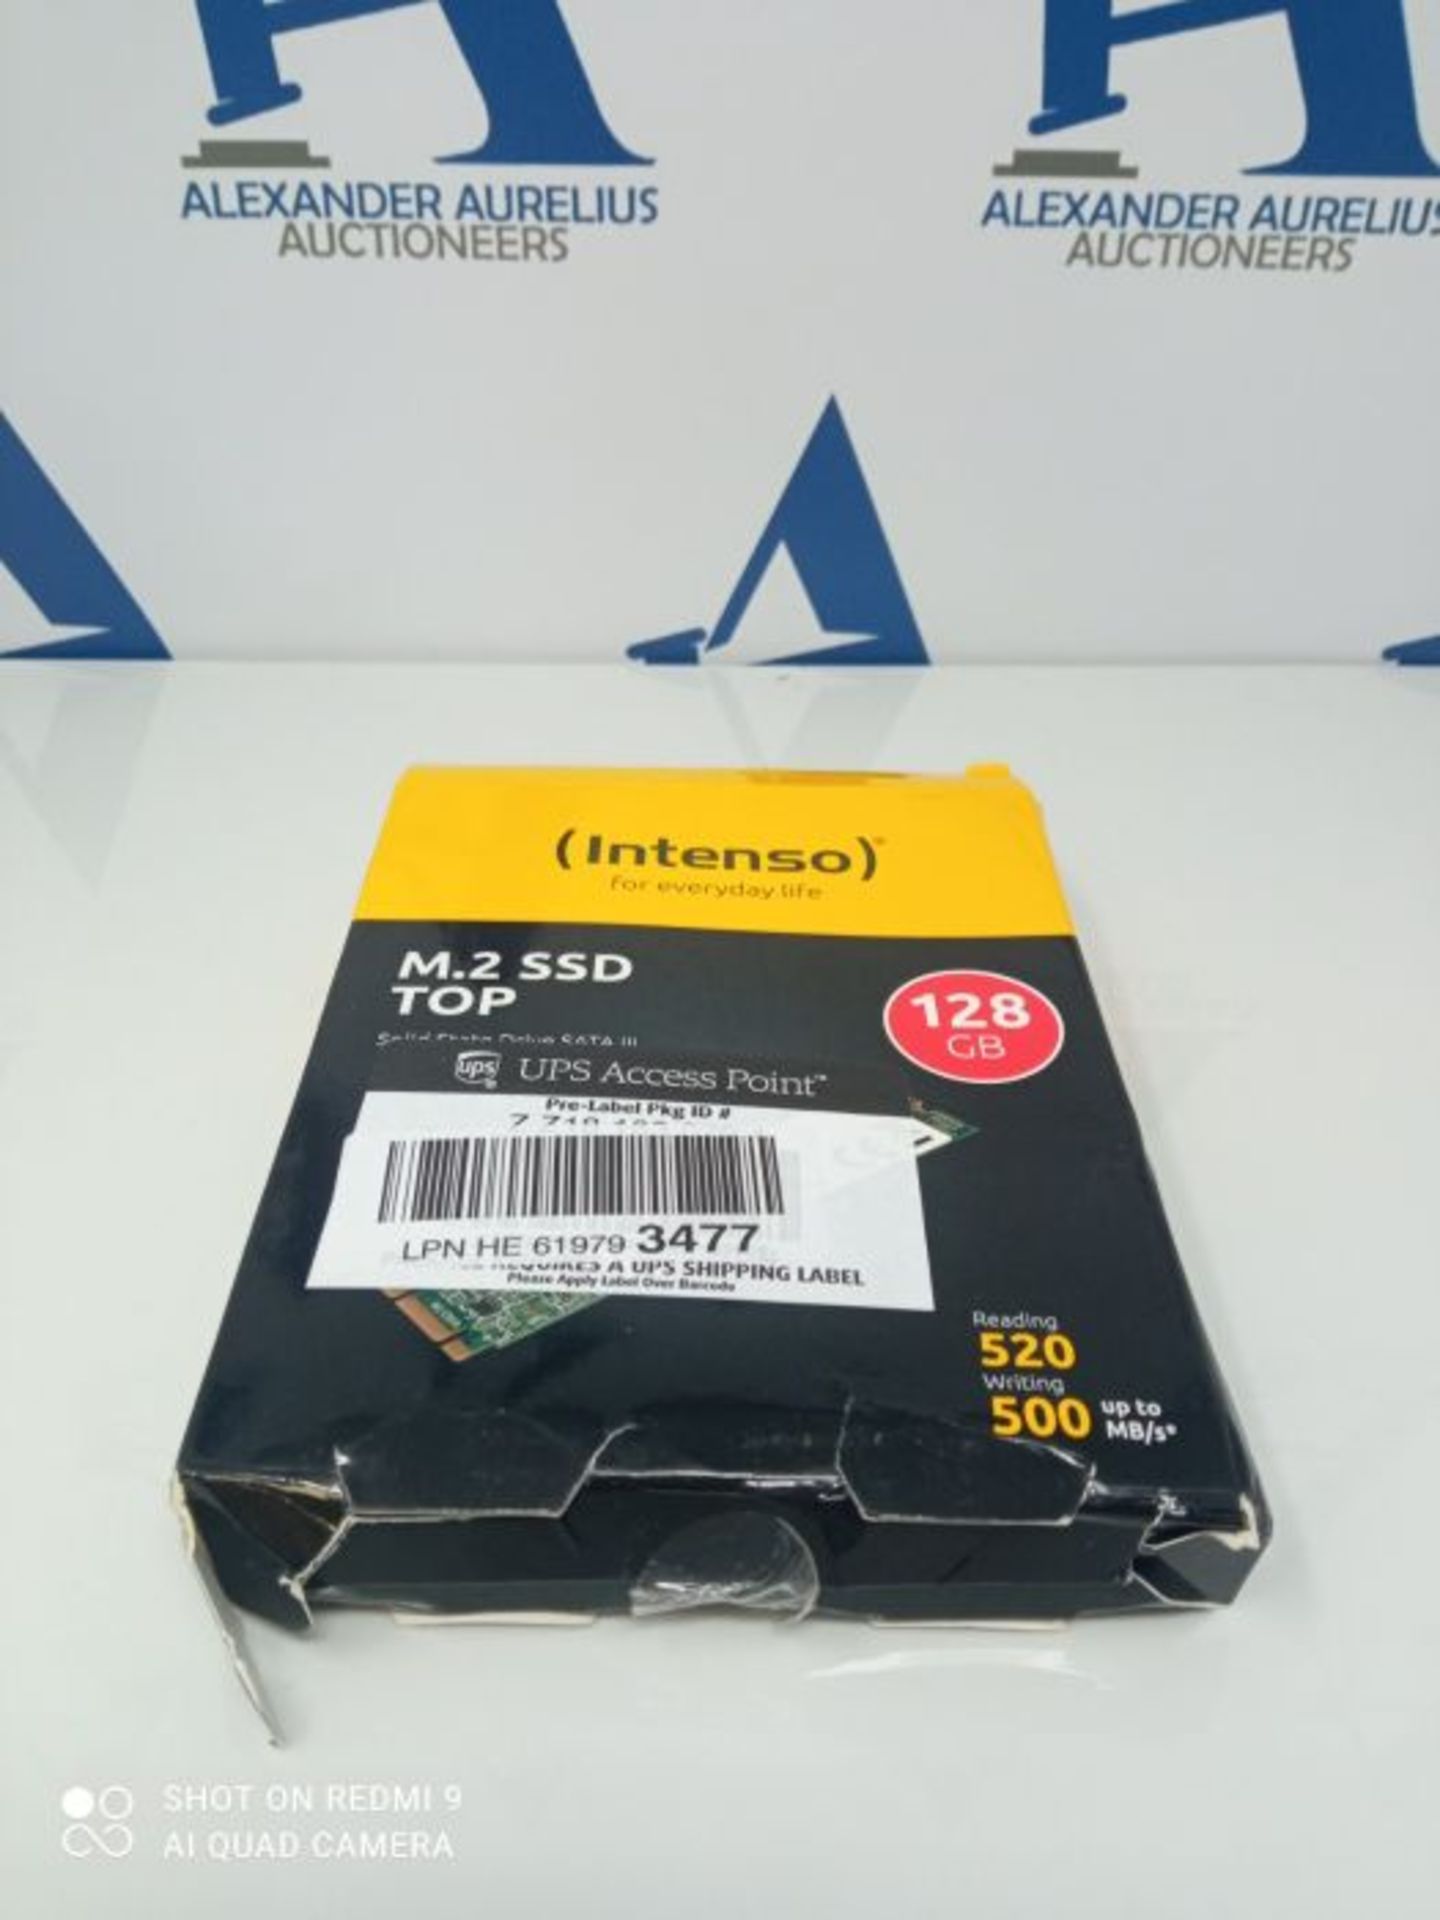 RRP £106.00 Intenso 3832430 Top Performance interne SSD, 128GB "M.2 SATA III" - Image 2 of 3